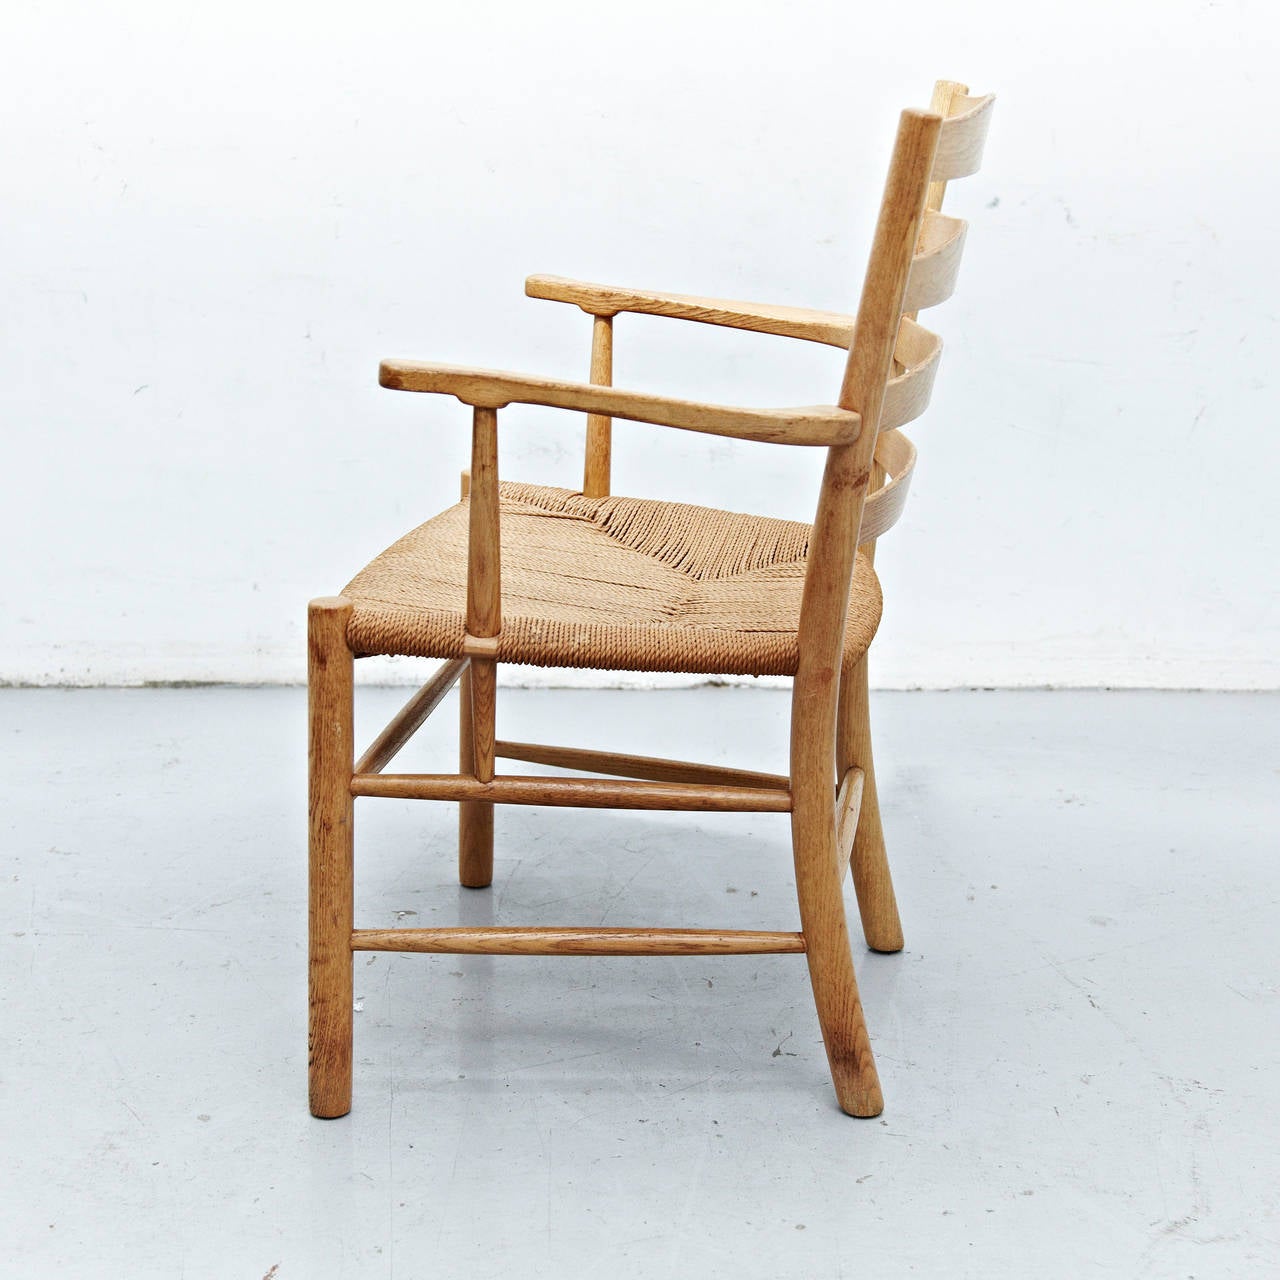 Armchair designed by Kaare Klint Manufactured for Grundtvig's Church in Denmark around 1950

Oak frame and seagrass seat .

 In good original condition, with minor wear consistent with age and use, preserving a nice patina.

Kaare Klint